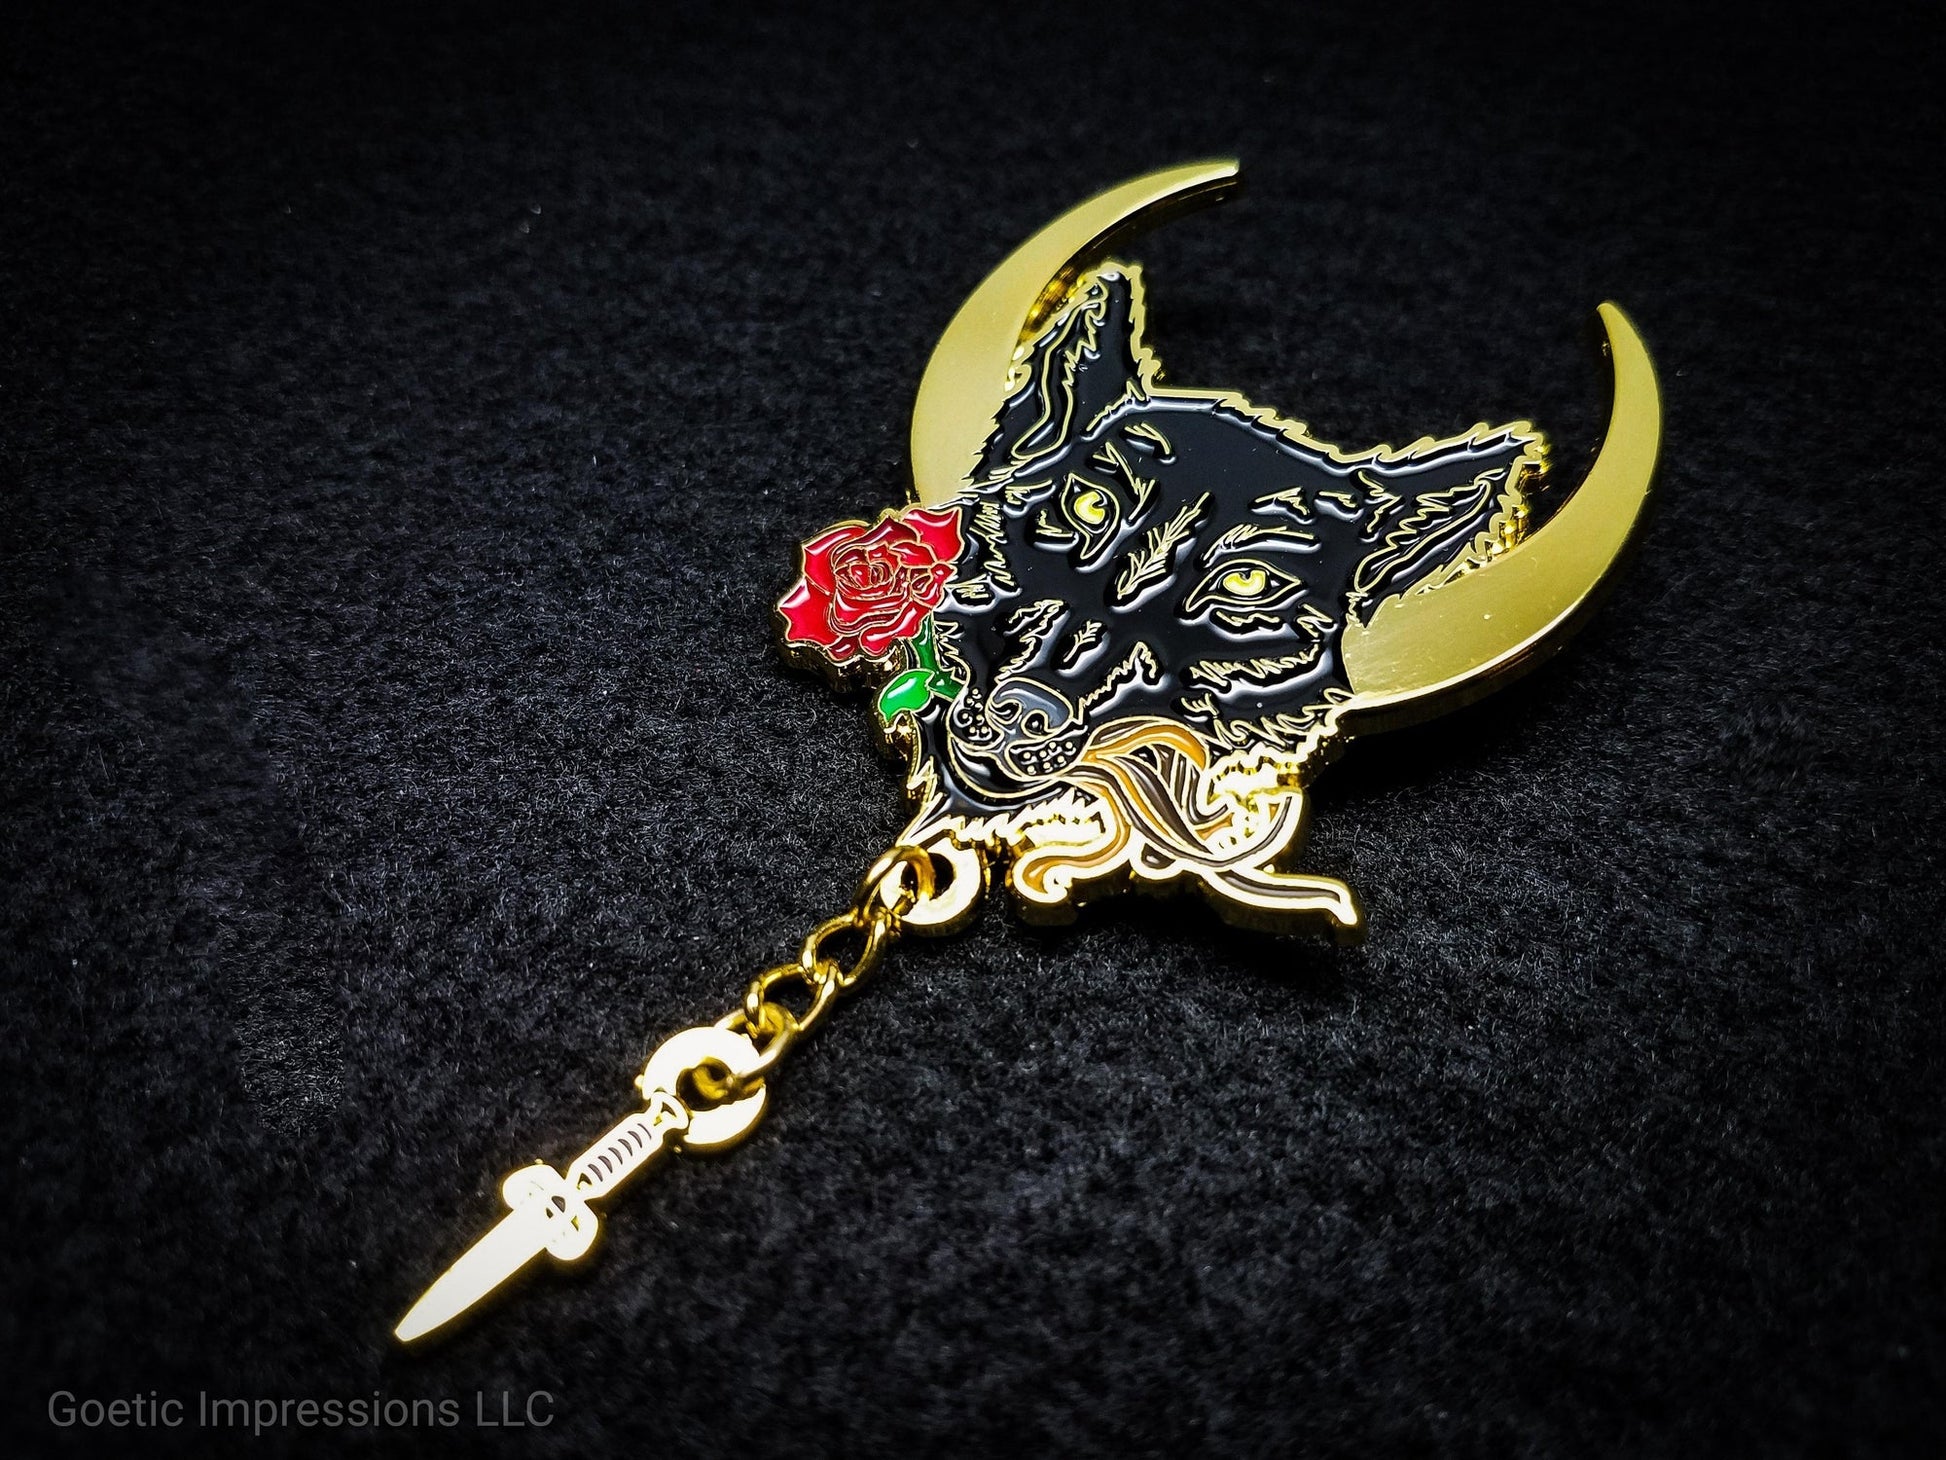 Lupercalia pin featuring a black wolf with a crescent moon in the background. The wolf is holding a rose, leather strips and has a chain with a dagger attached to it. It is plated in gold.